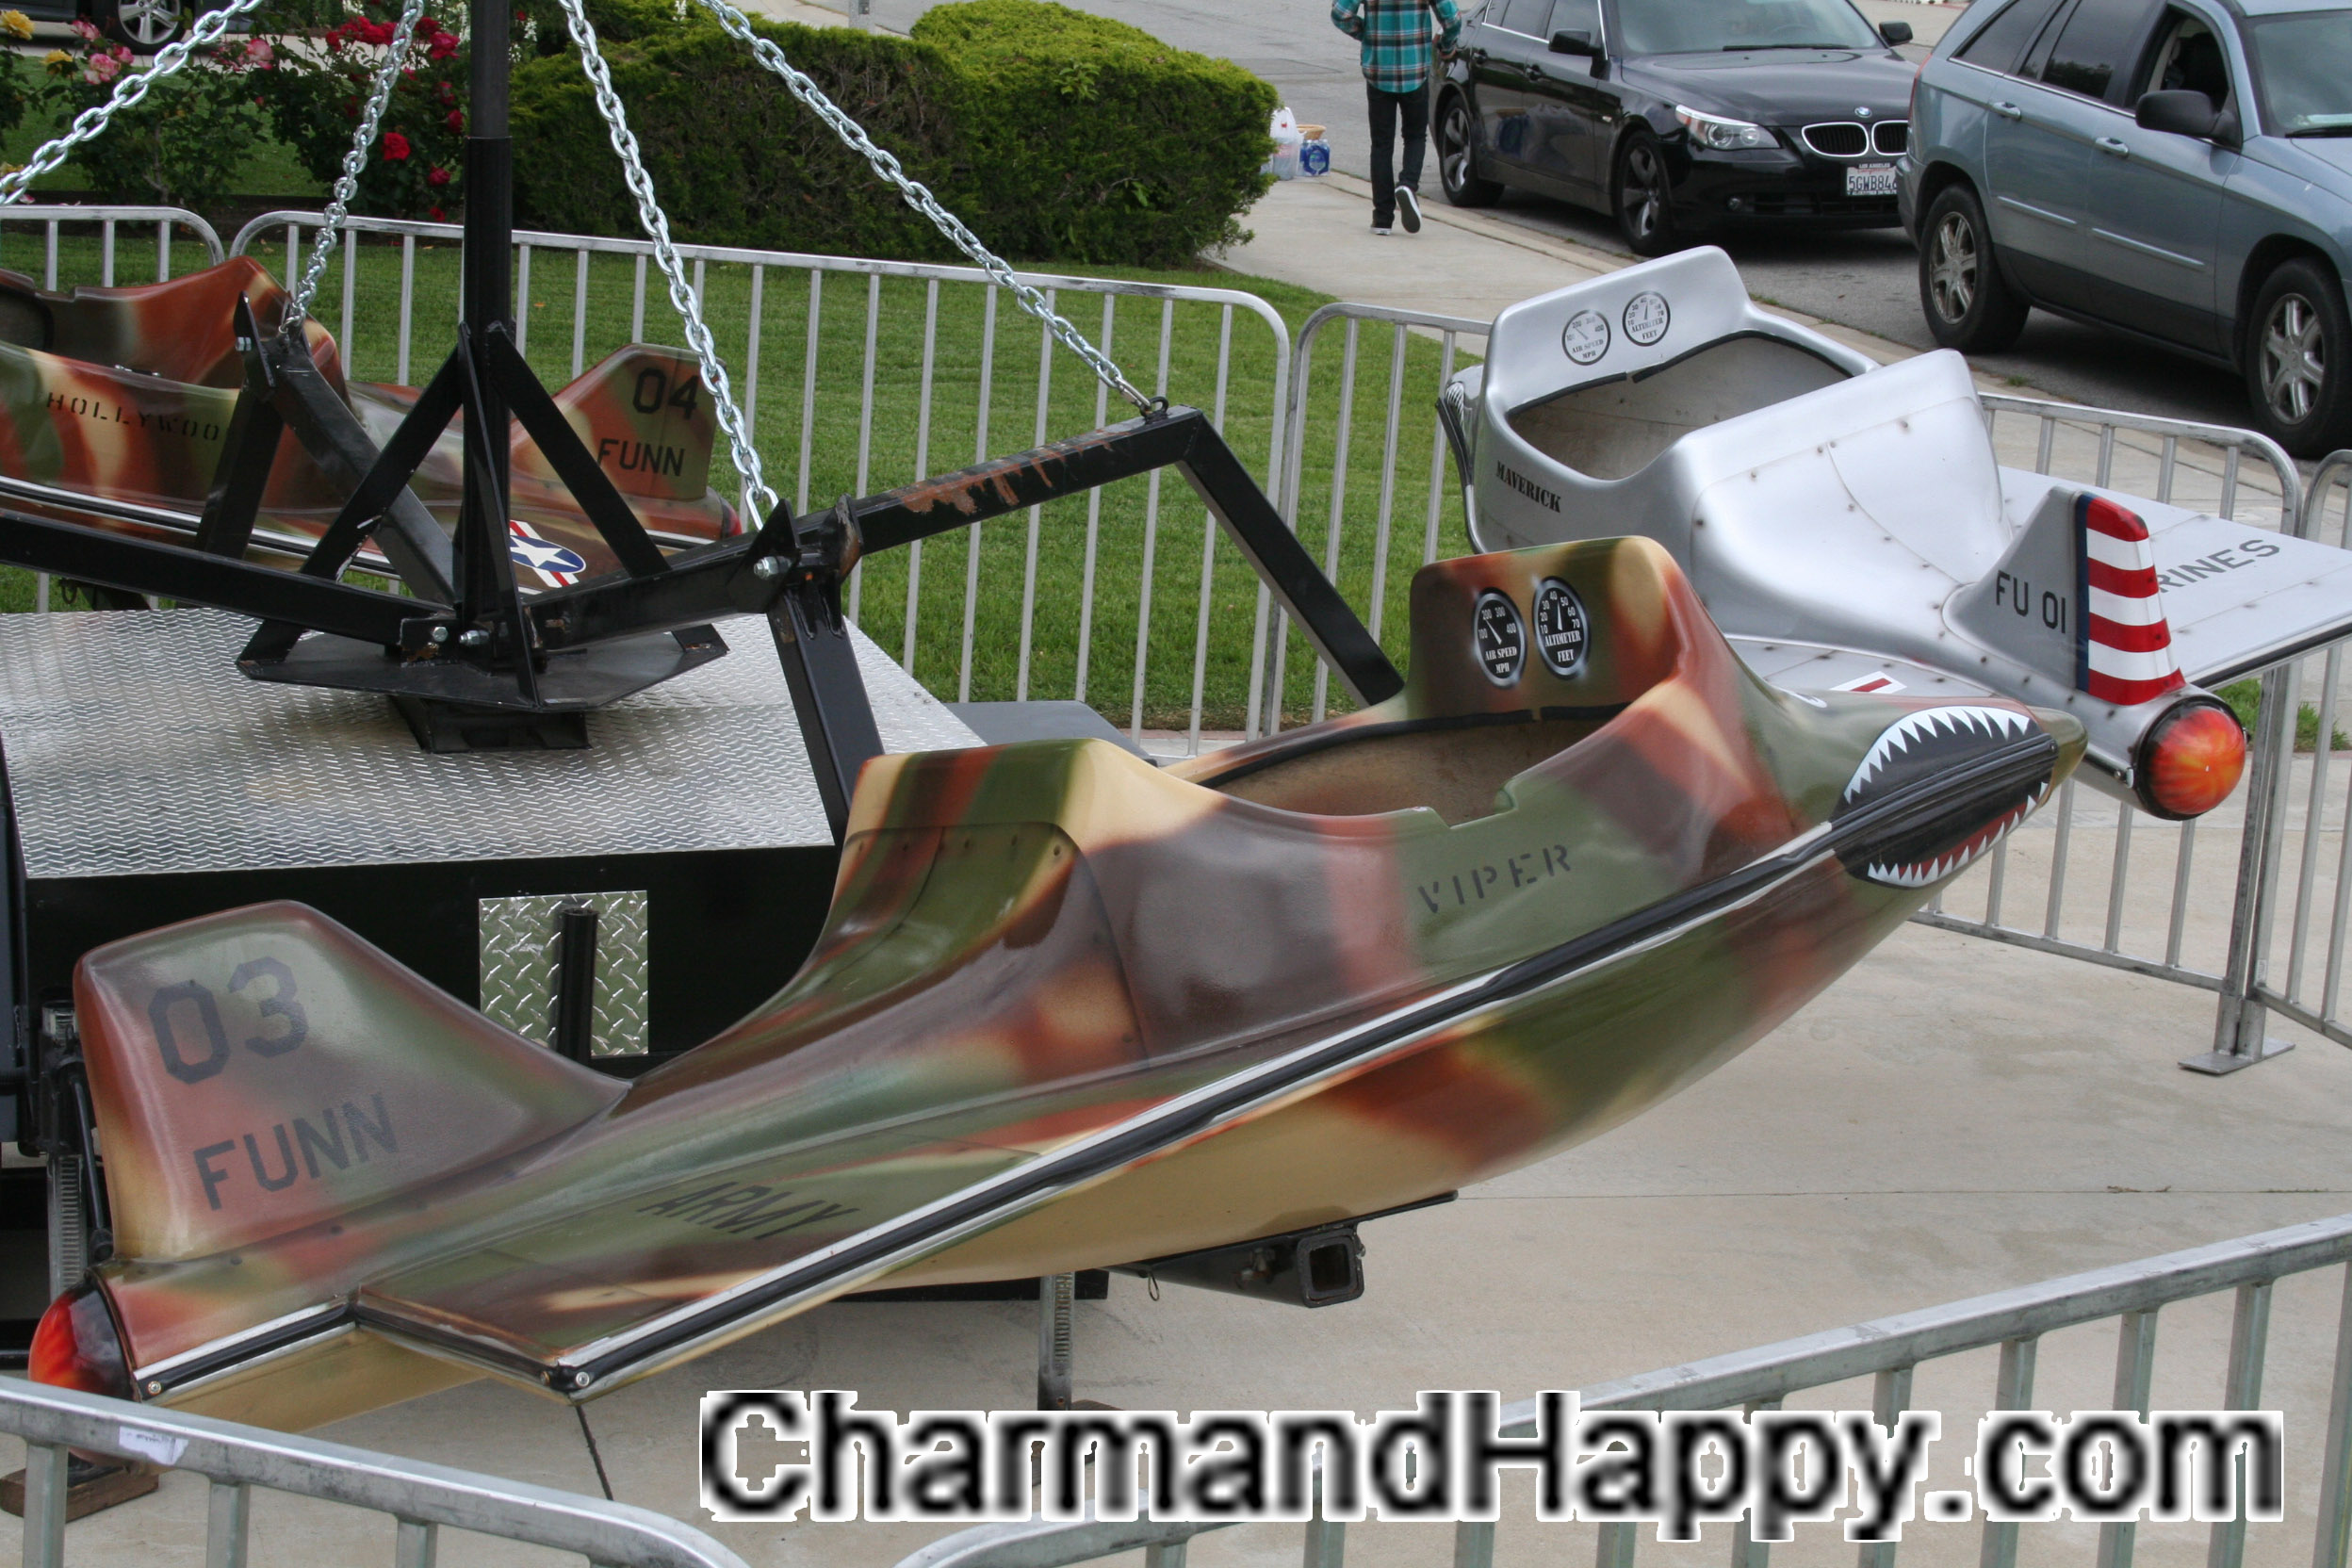 CharmandHappy com airplane amusement carnival rides games whittier los angeles SoCal